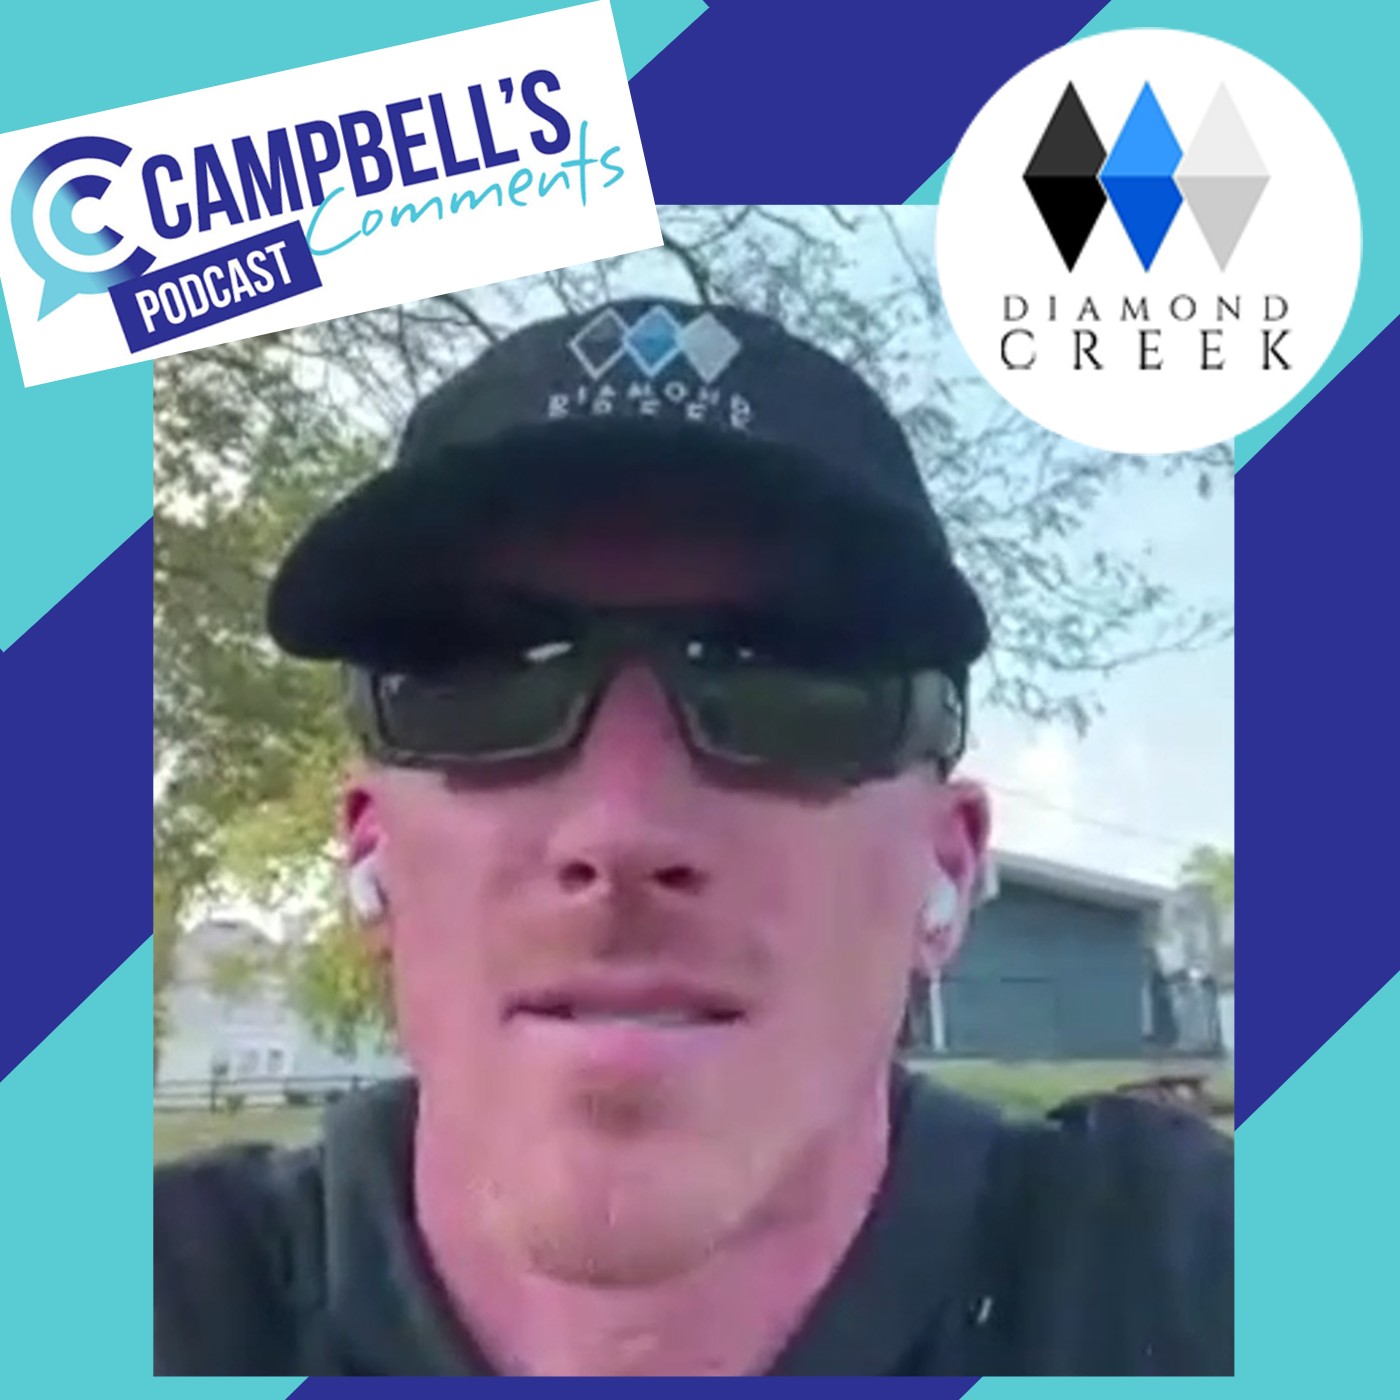 You are currently viewing 267: Campbells Comments with Adam Bowden from Diamond Creek Farms